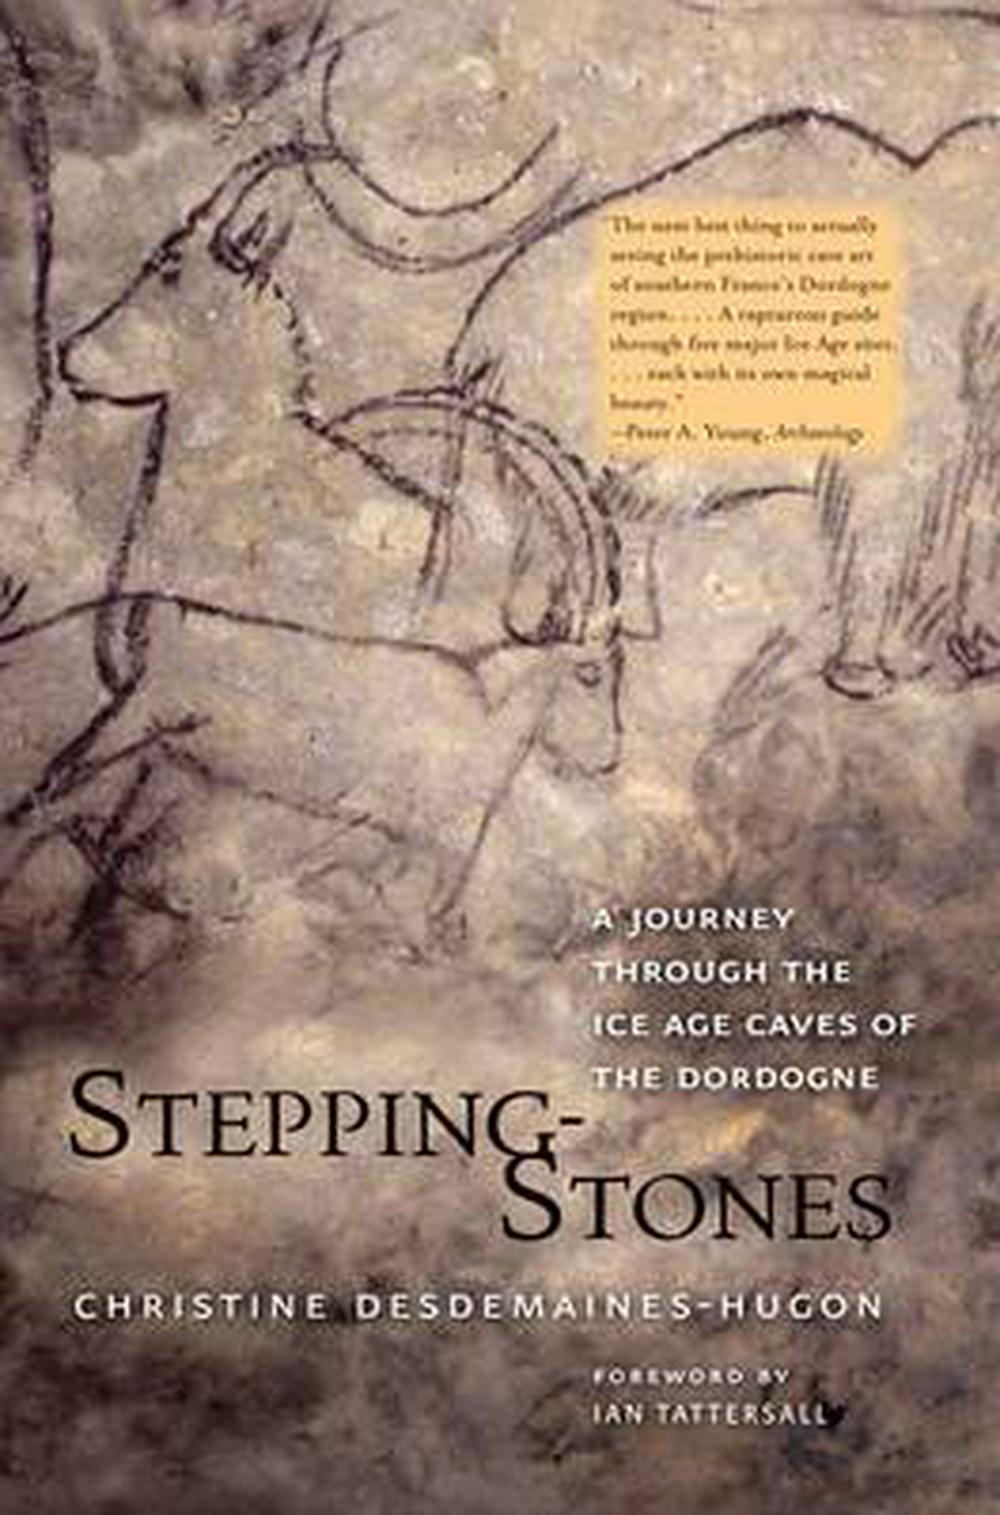 Stepping-Stones: A Journey through the Ice Age Caves of the Dordogne